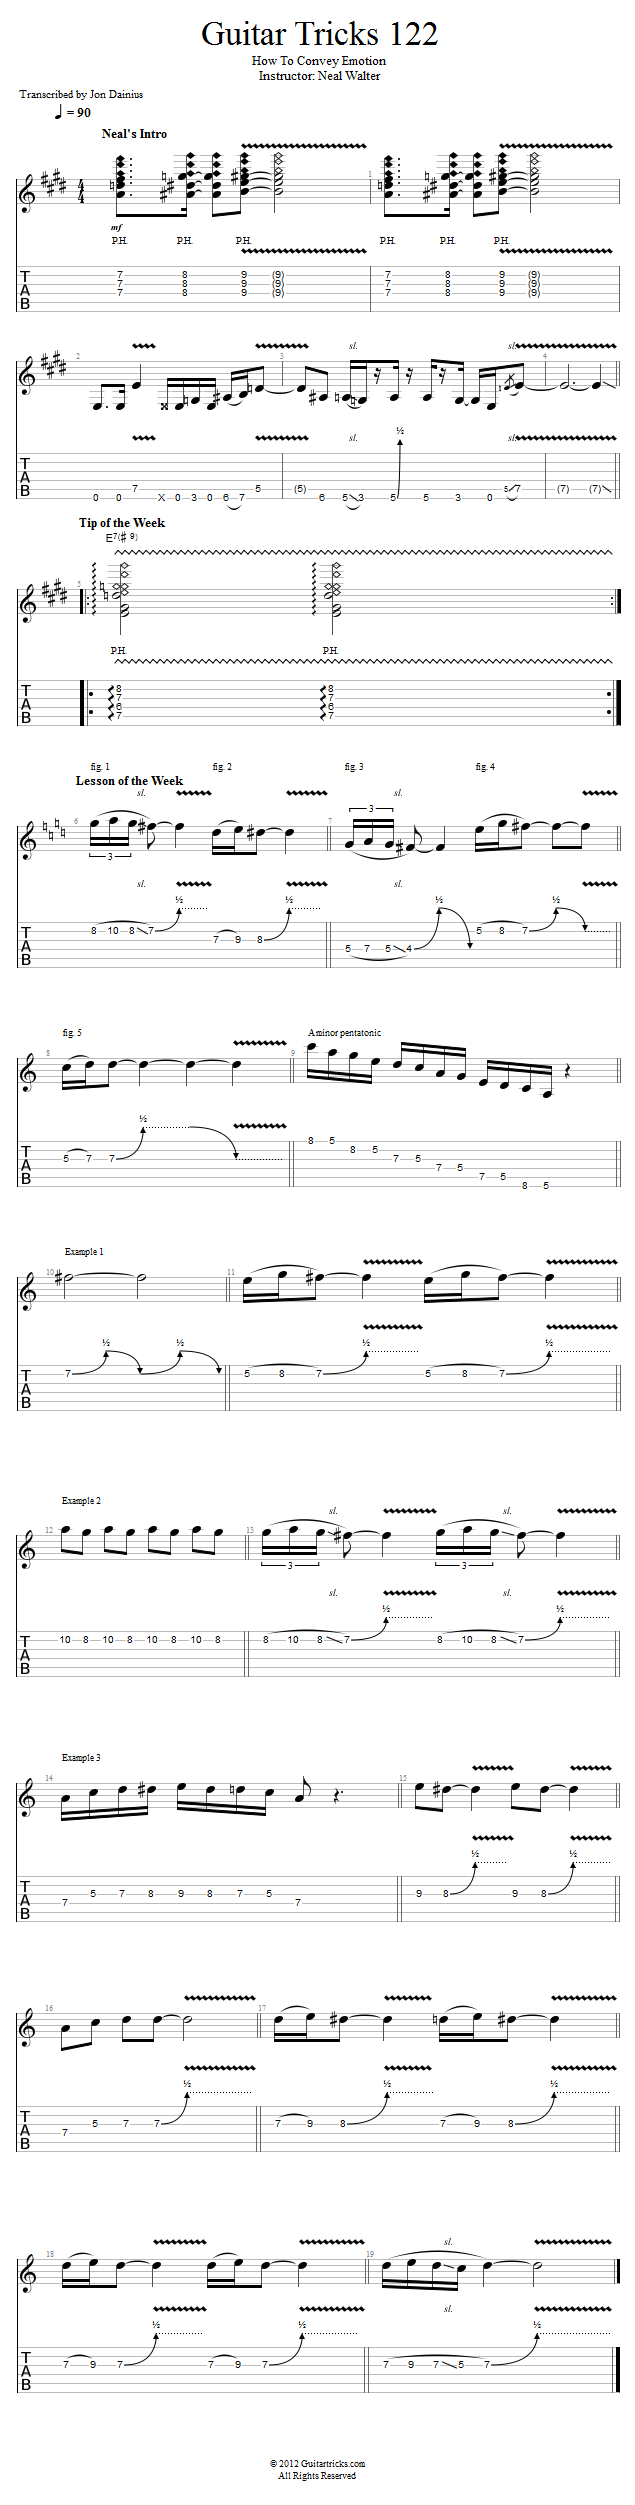 Guitar Tricks 122: How-To Convey Emotion song notation